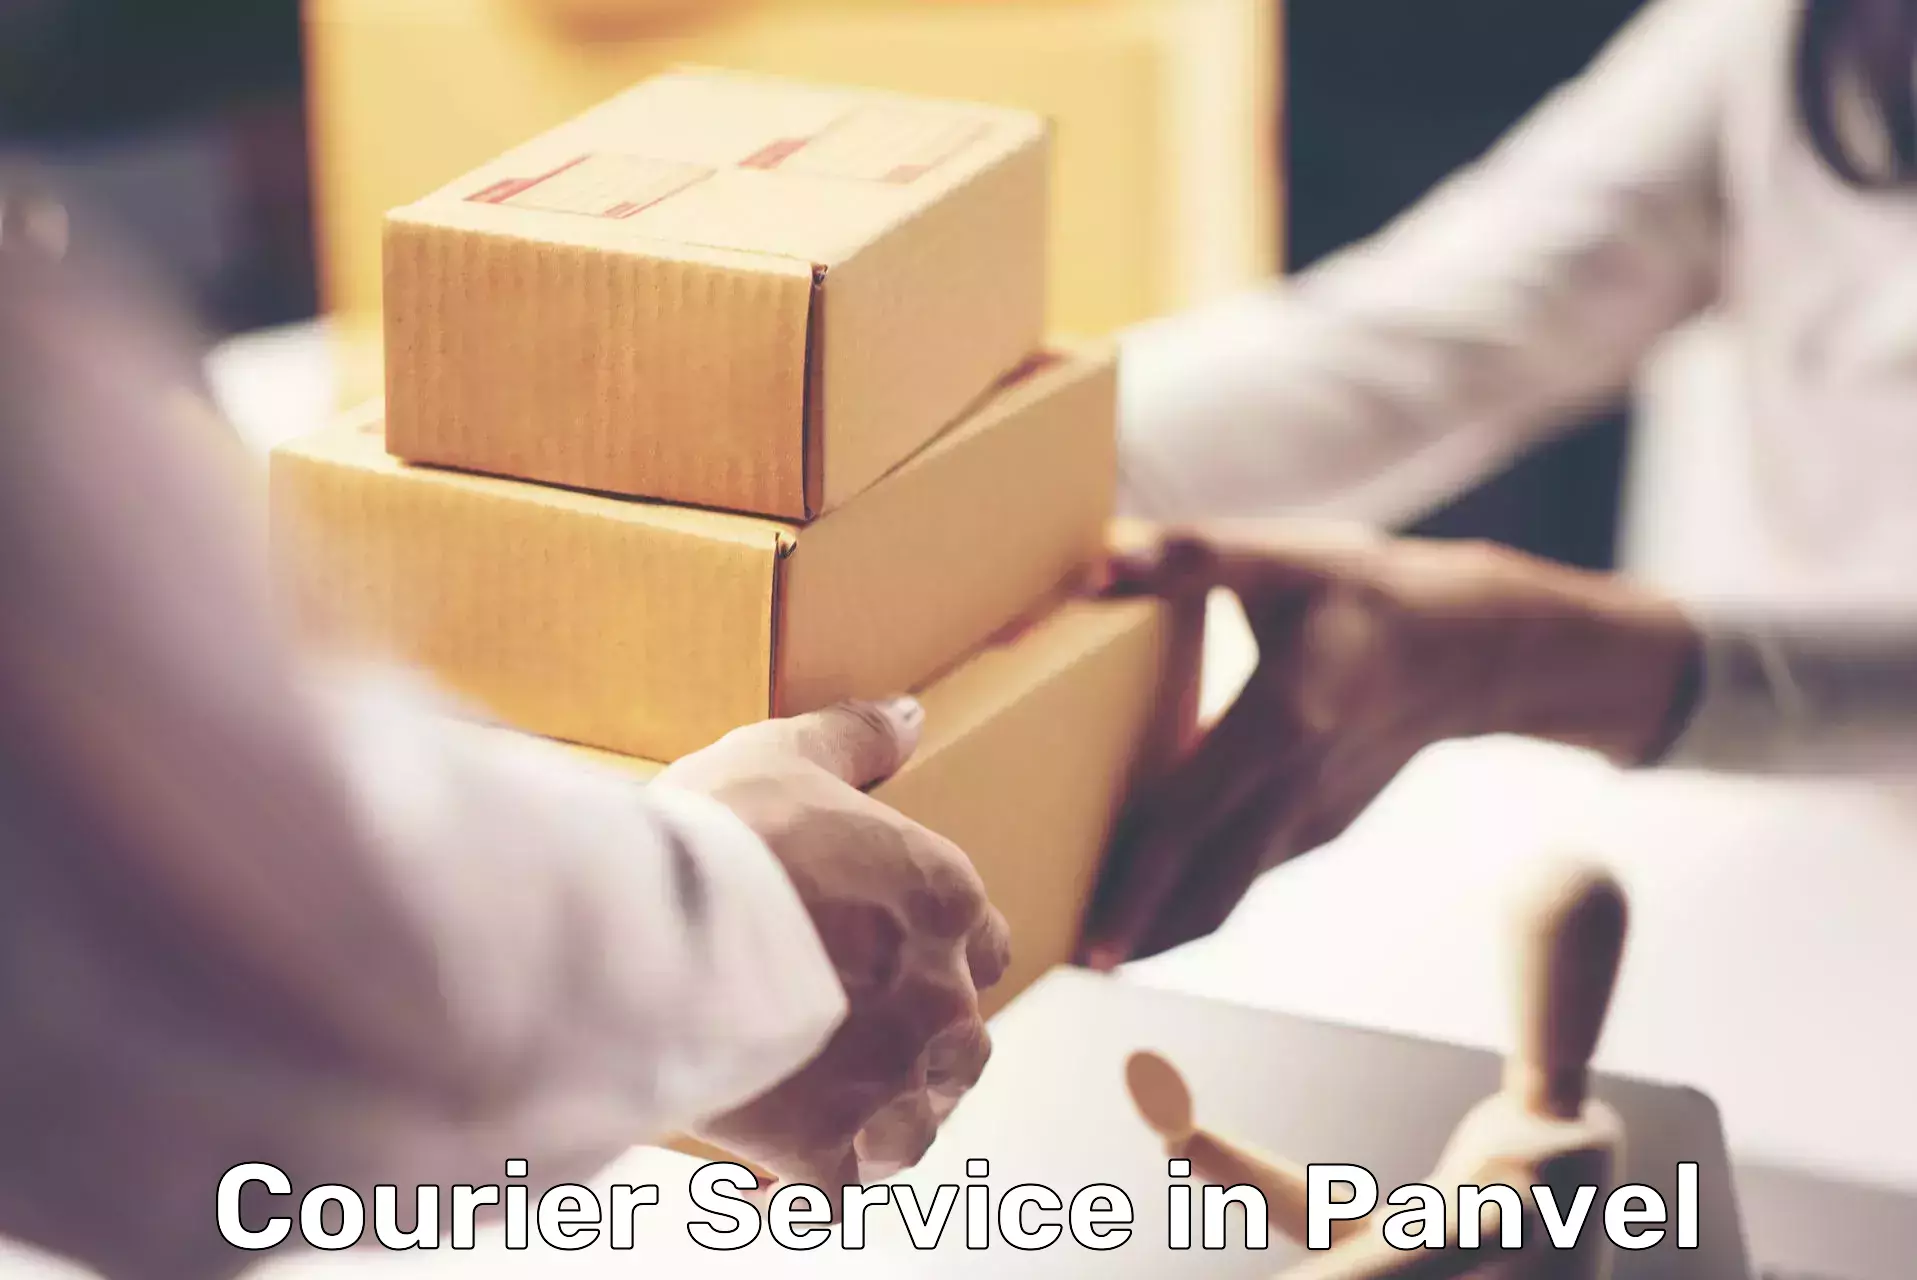 Customizable shipping options in Panvel